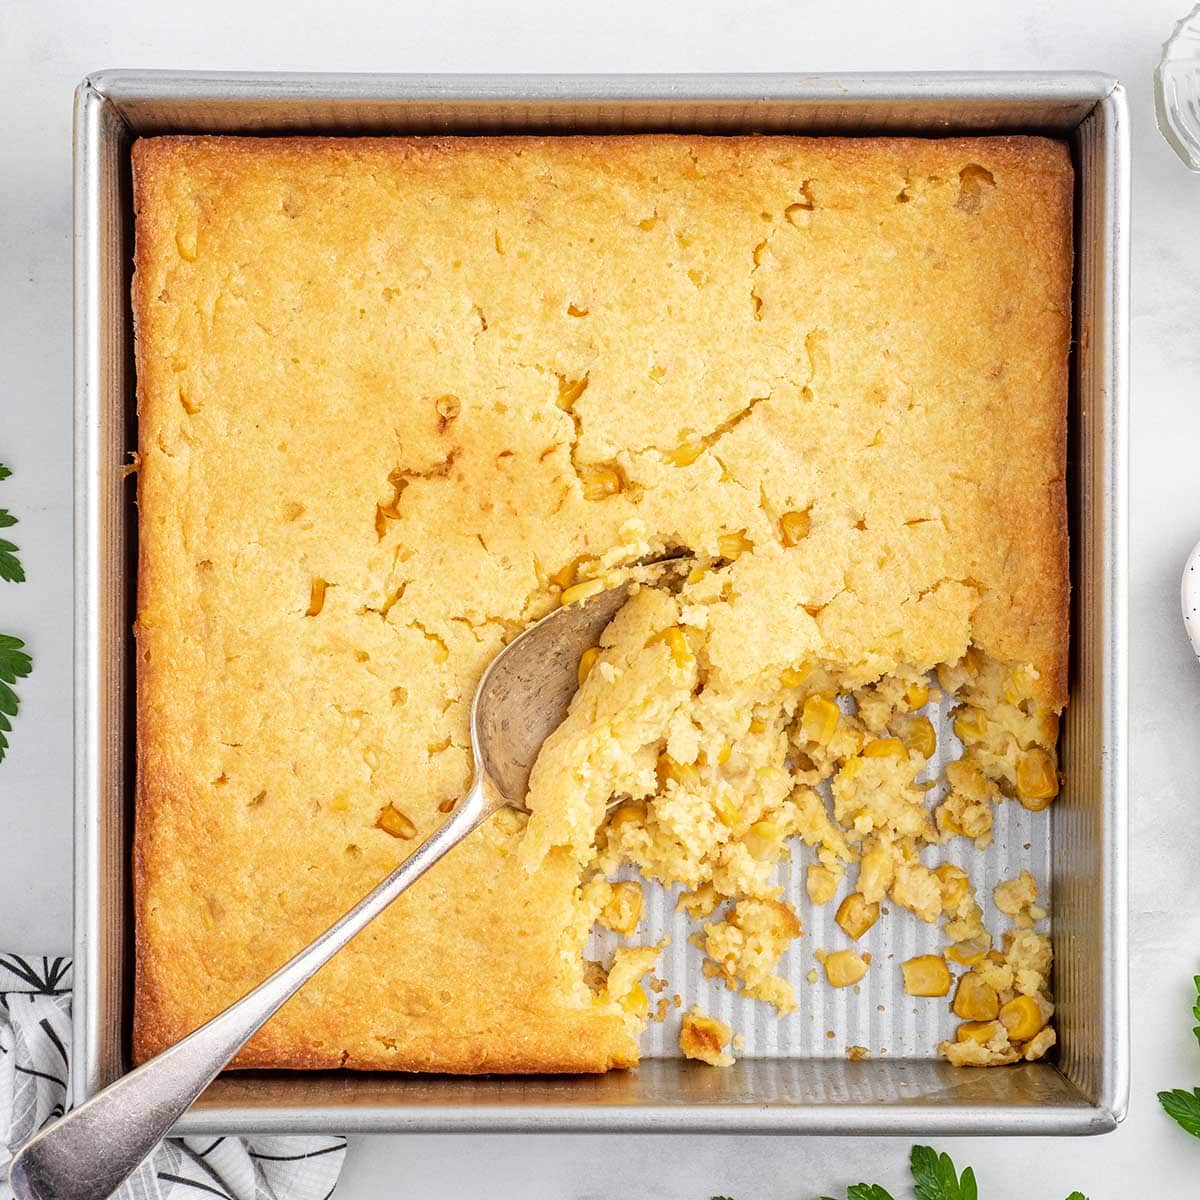 JIFFY Mix - Over the years JIFFY Spoon Bread Casserole